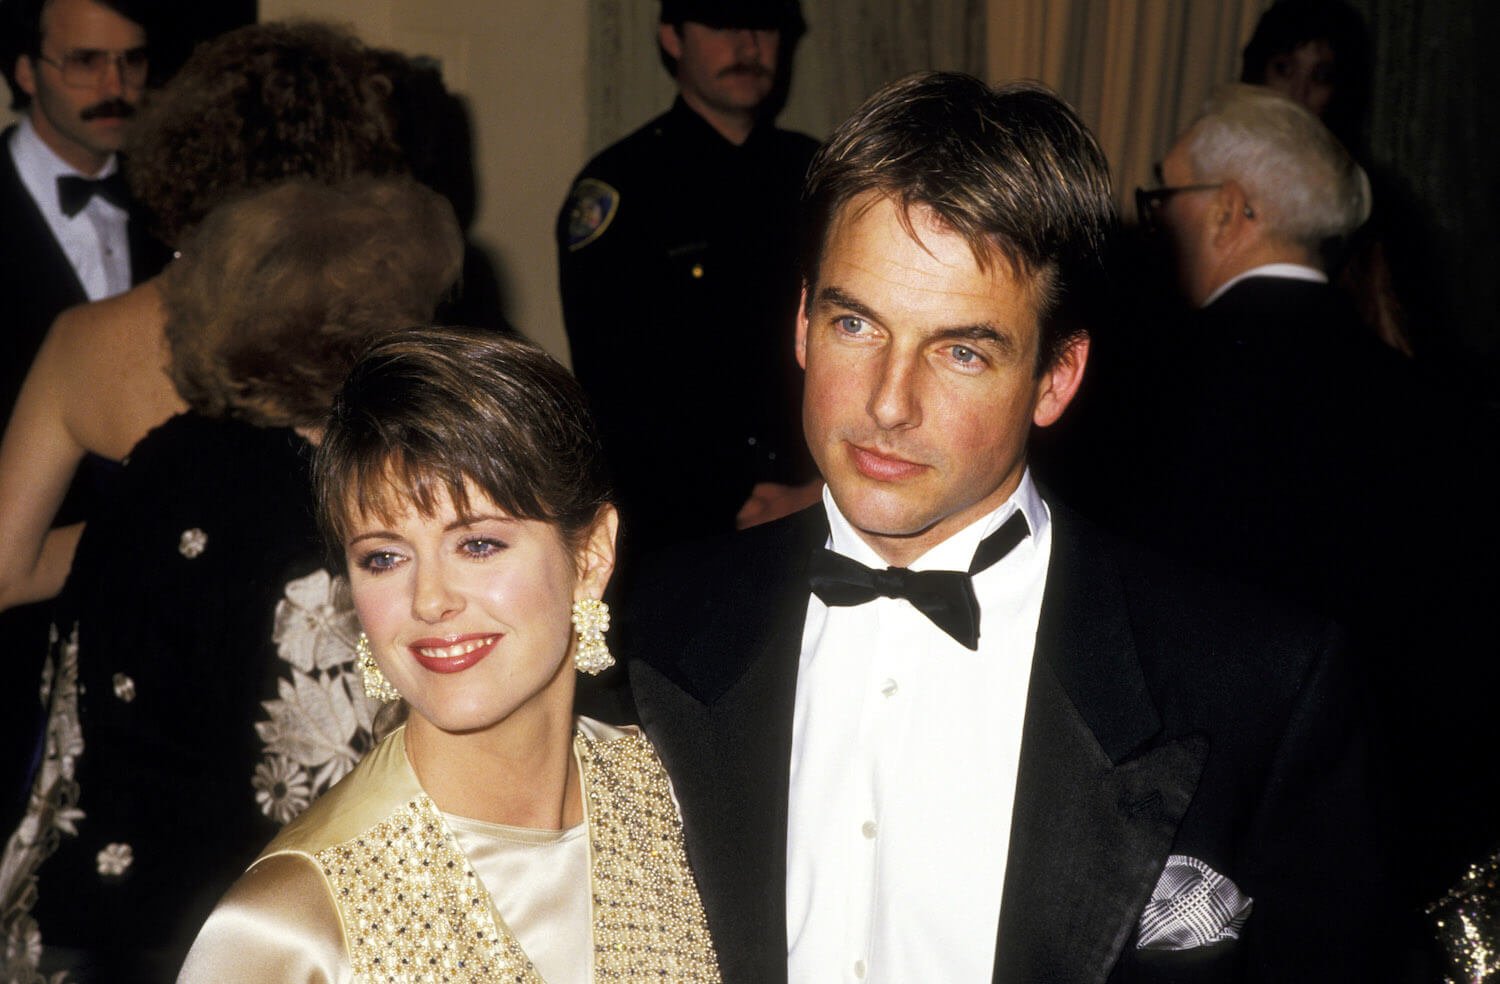 Pam Dawber and Mark Harmon dressed in fancy clothing at an event